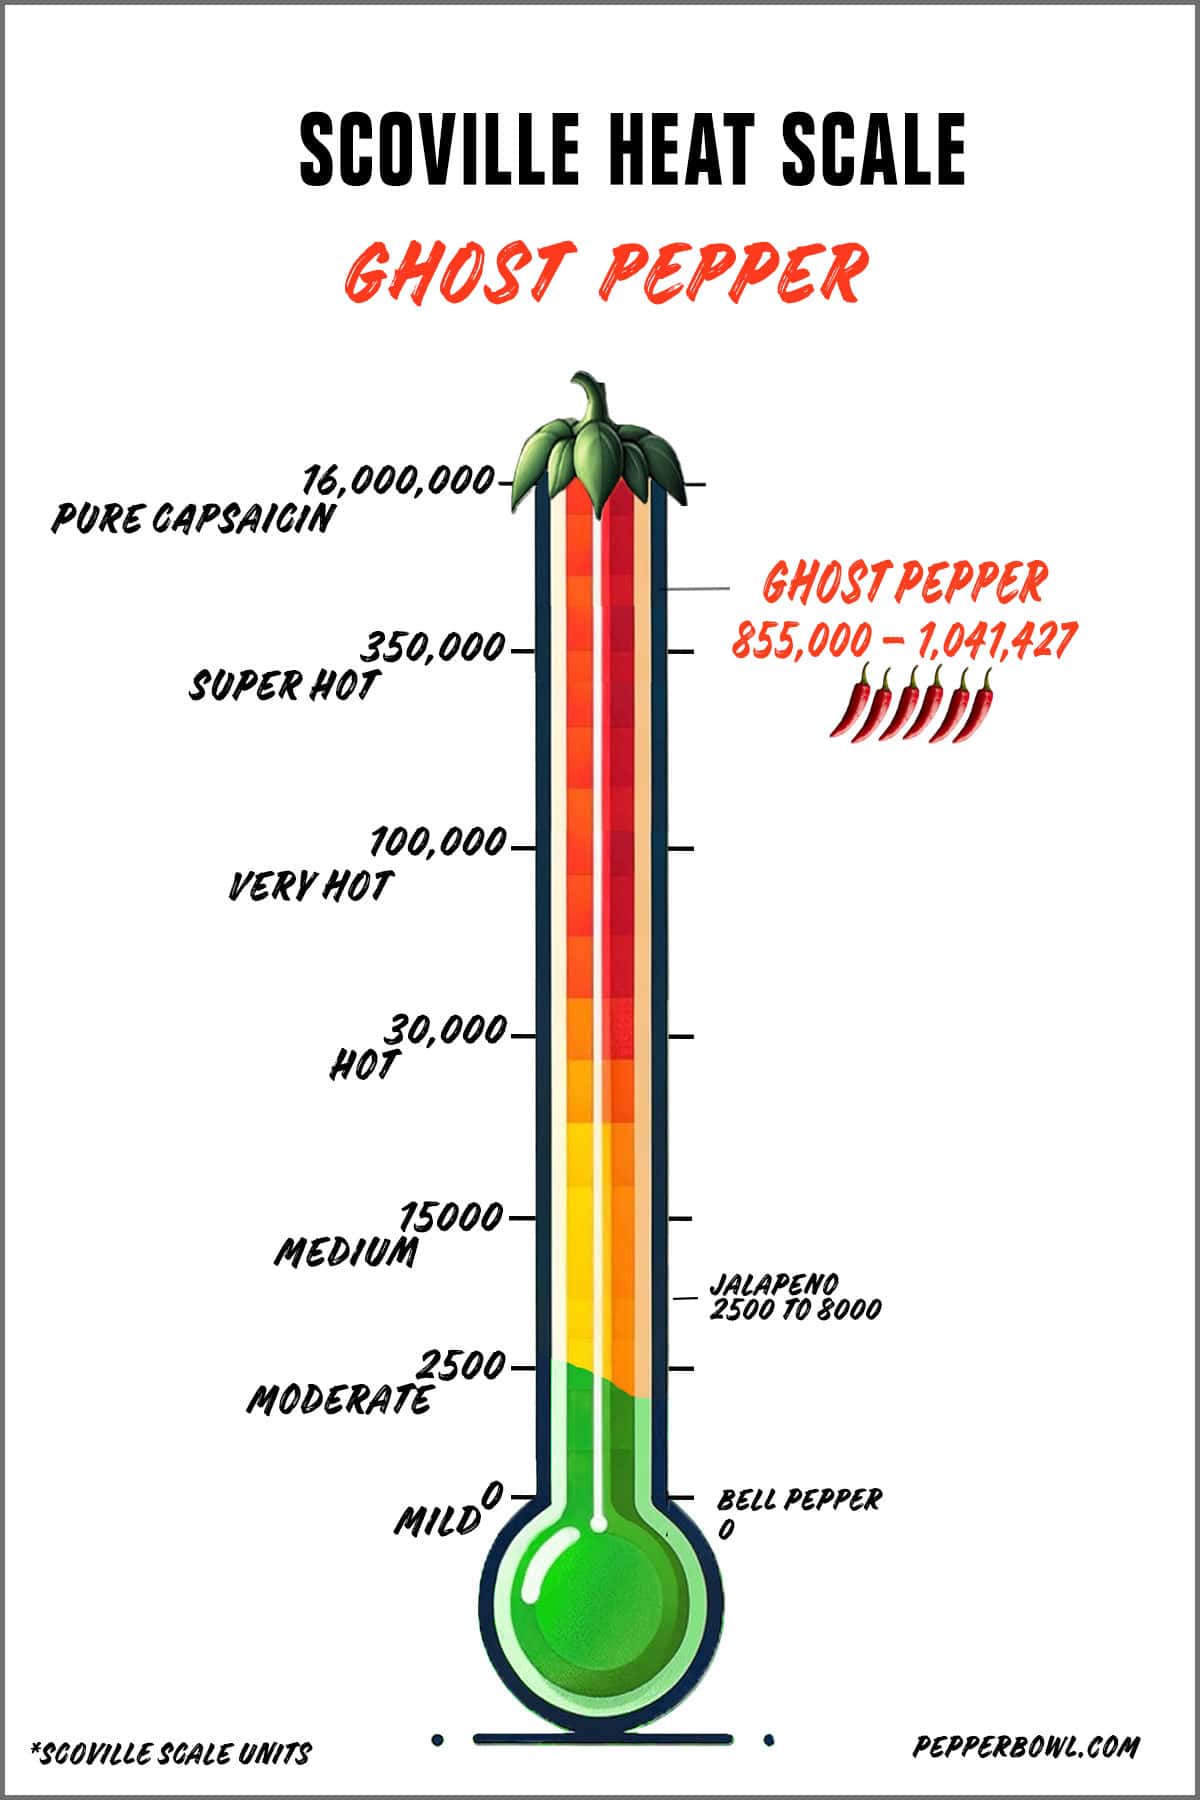 Illustration of the ghost pepper in the Scoville scale, representing its super hot heat intensity.